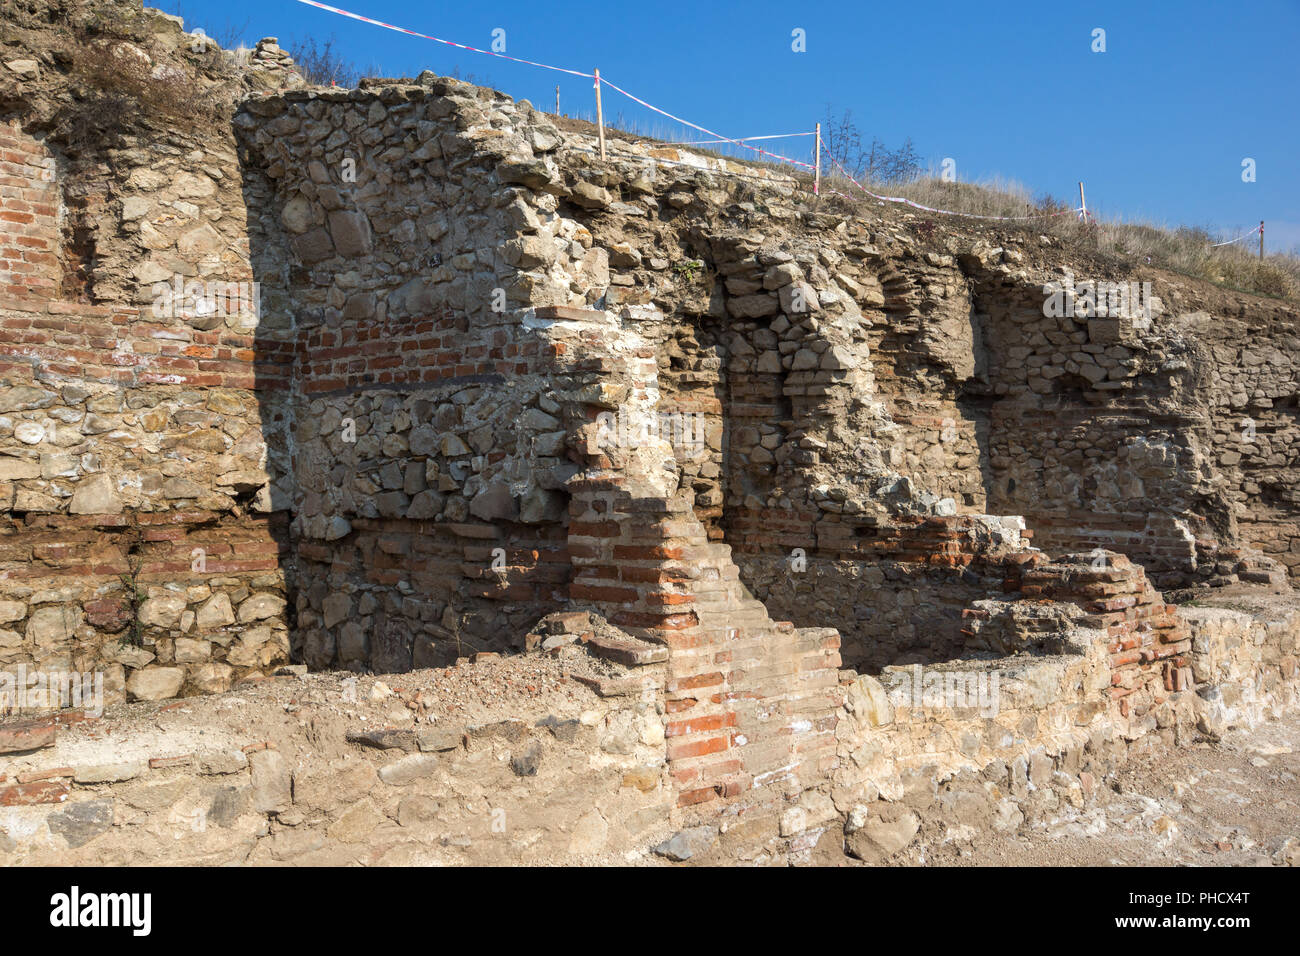 Heraclea Sintica -  Ruins of ancient Greek polis  built by Philip II of Macedon,  located near town of Petrich, Bulgaria Stock Photo